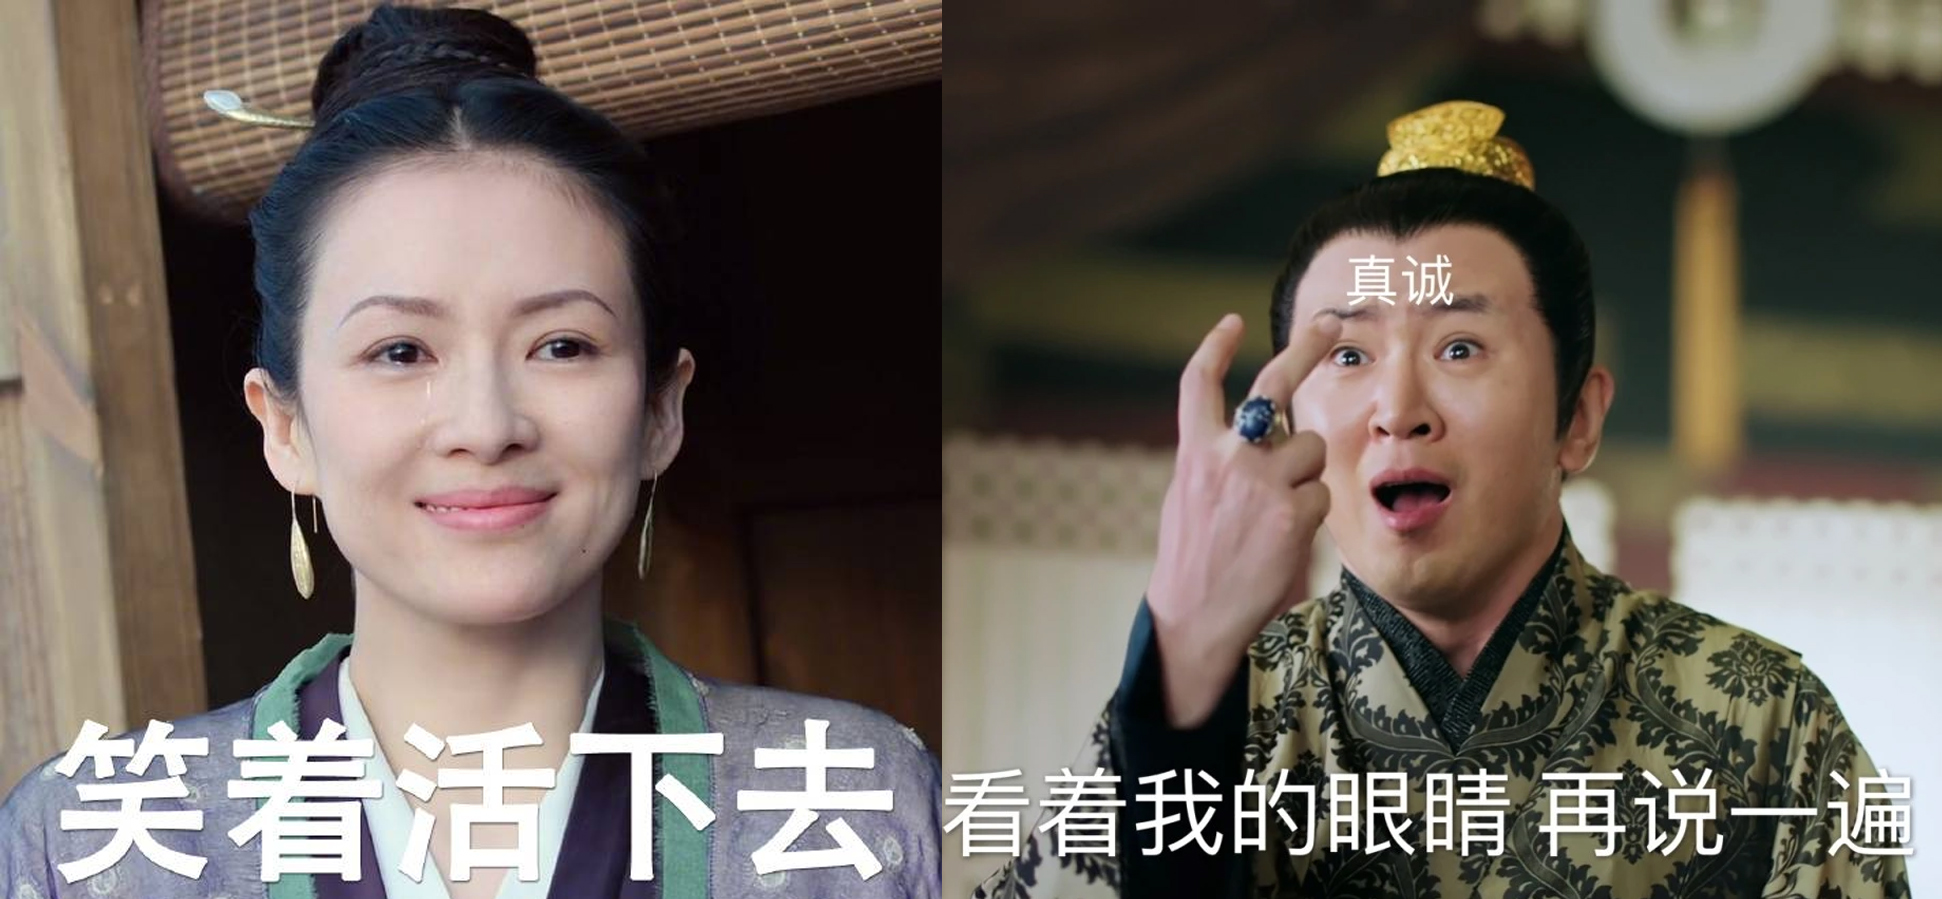 Zhang Ziyi’s Drama Is Doing So Badly, Viewers Can Now Watch Episodes In Advance For Just S$0.20